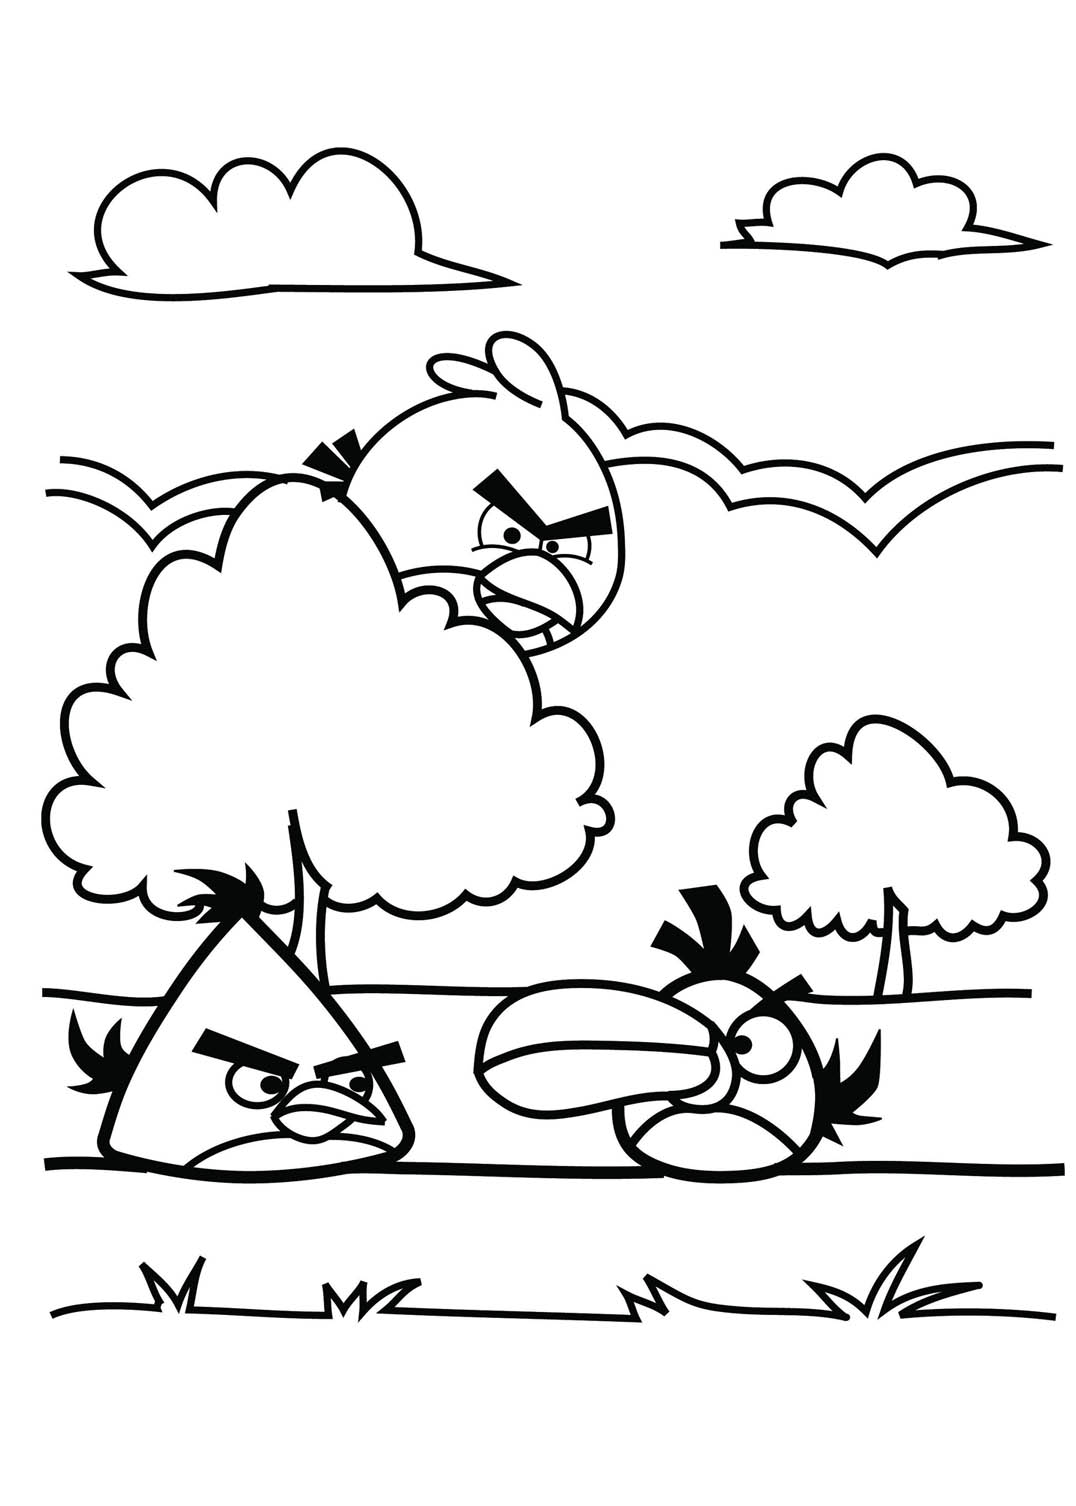 Download Angry birds for children - Angry Birds Kids Coloring Pages